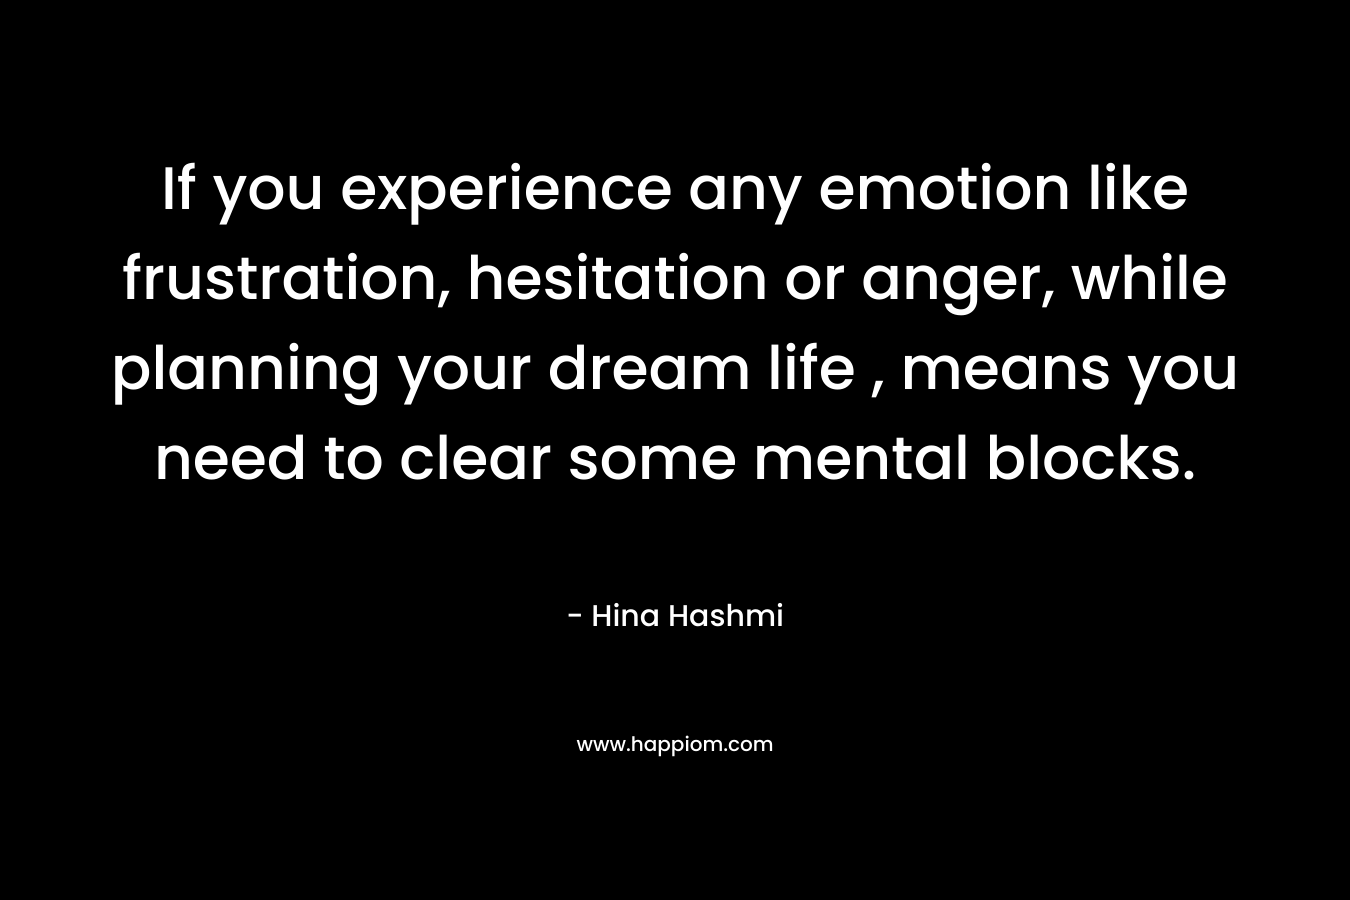 If you experience any emotion like frustration, hesitation or anger, while planning your dream life , means you need to clear some mental blocks.